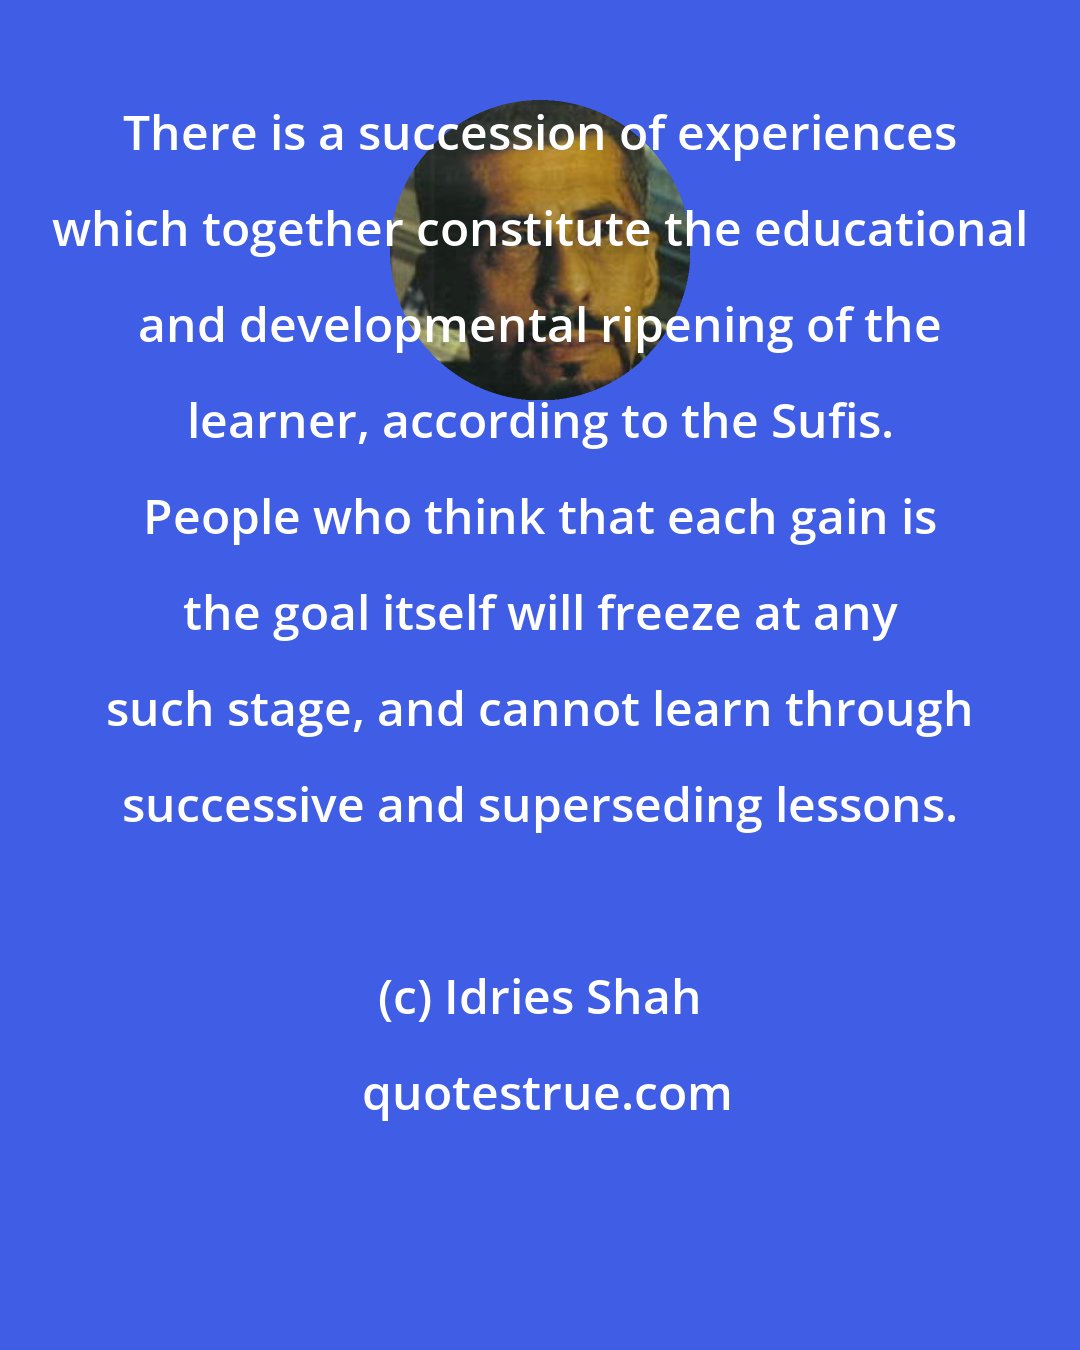 Idries Shah: There is a succession of experiences which together constitute the educational and developmental ripening of the learner, according to the Sufis. People who think that each gain is the goal itself will freeze at any such stage, and cannot learn through successive and superseding lessons.